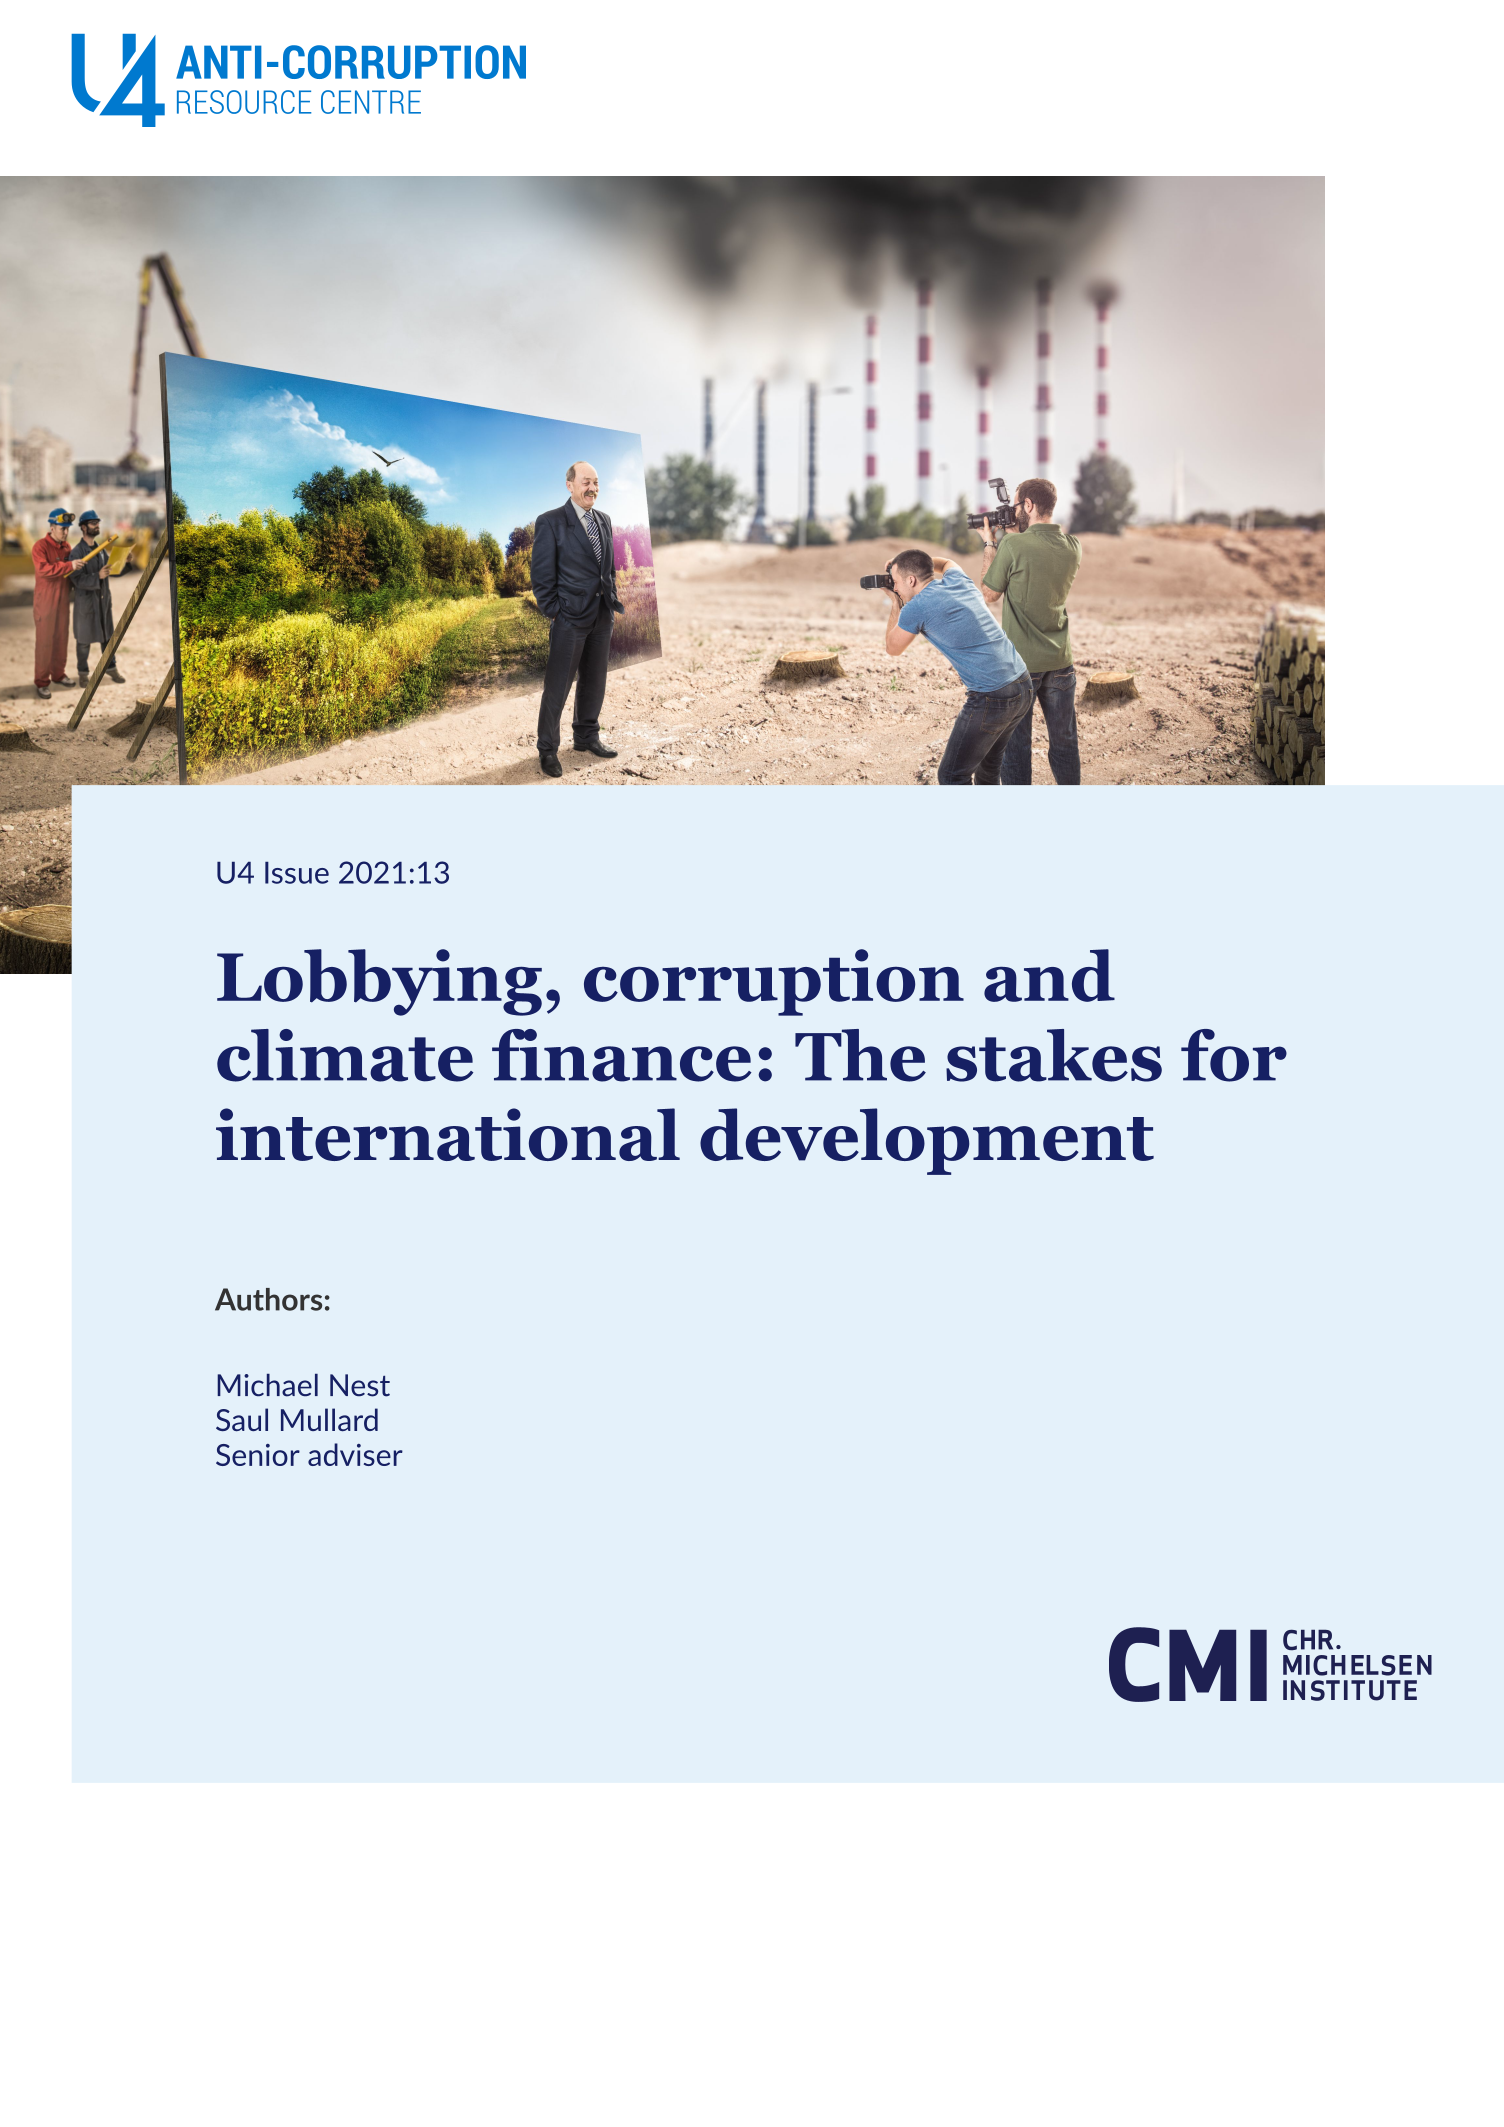 Lobbying, corruption and climate finance: The stakes for international development